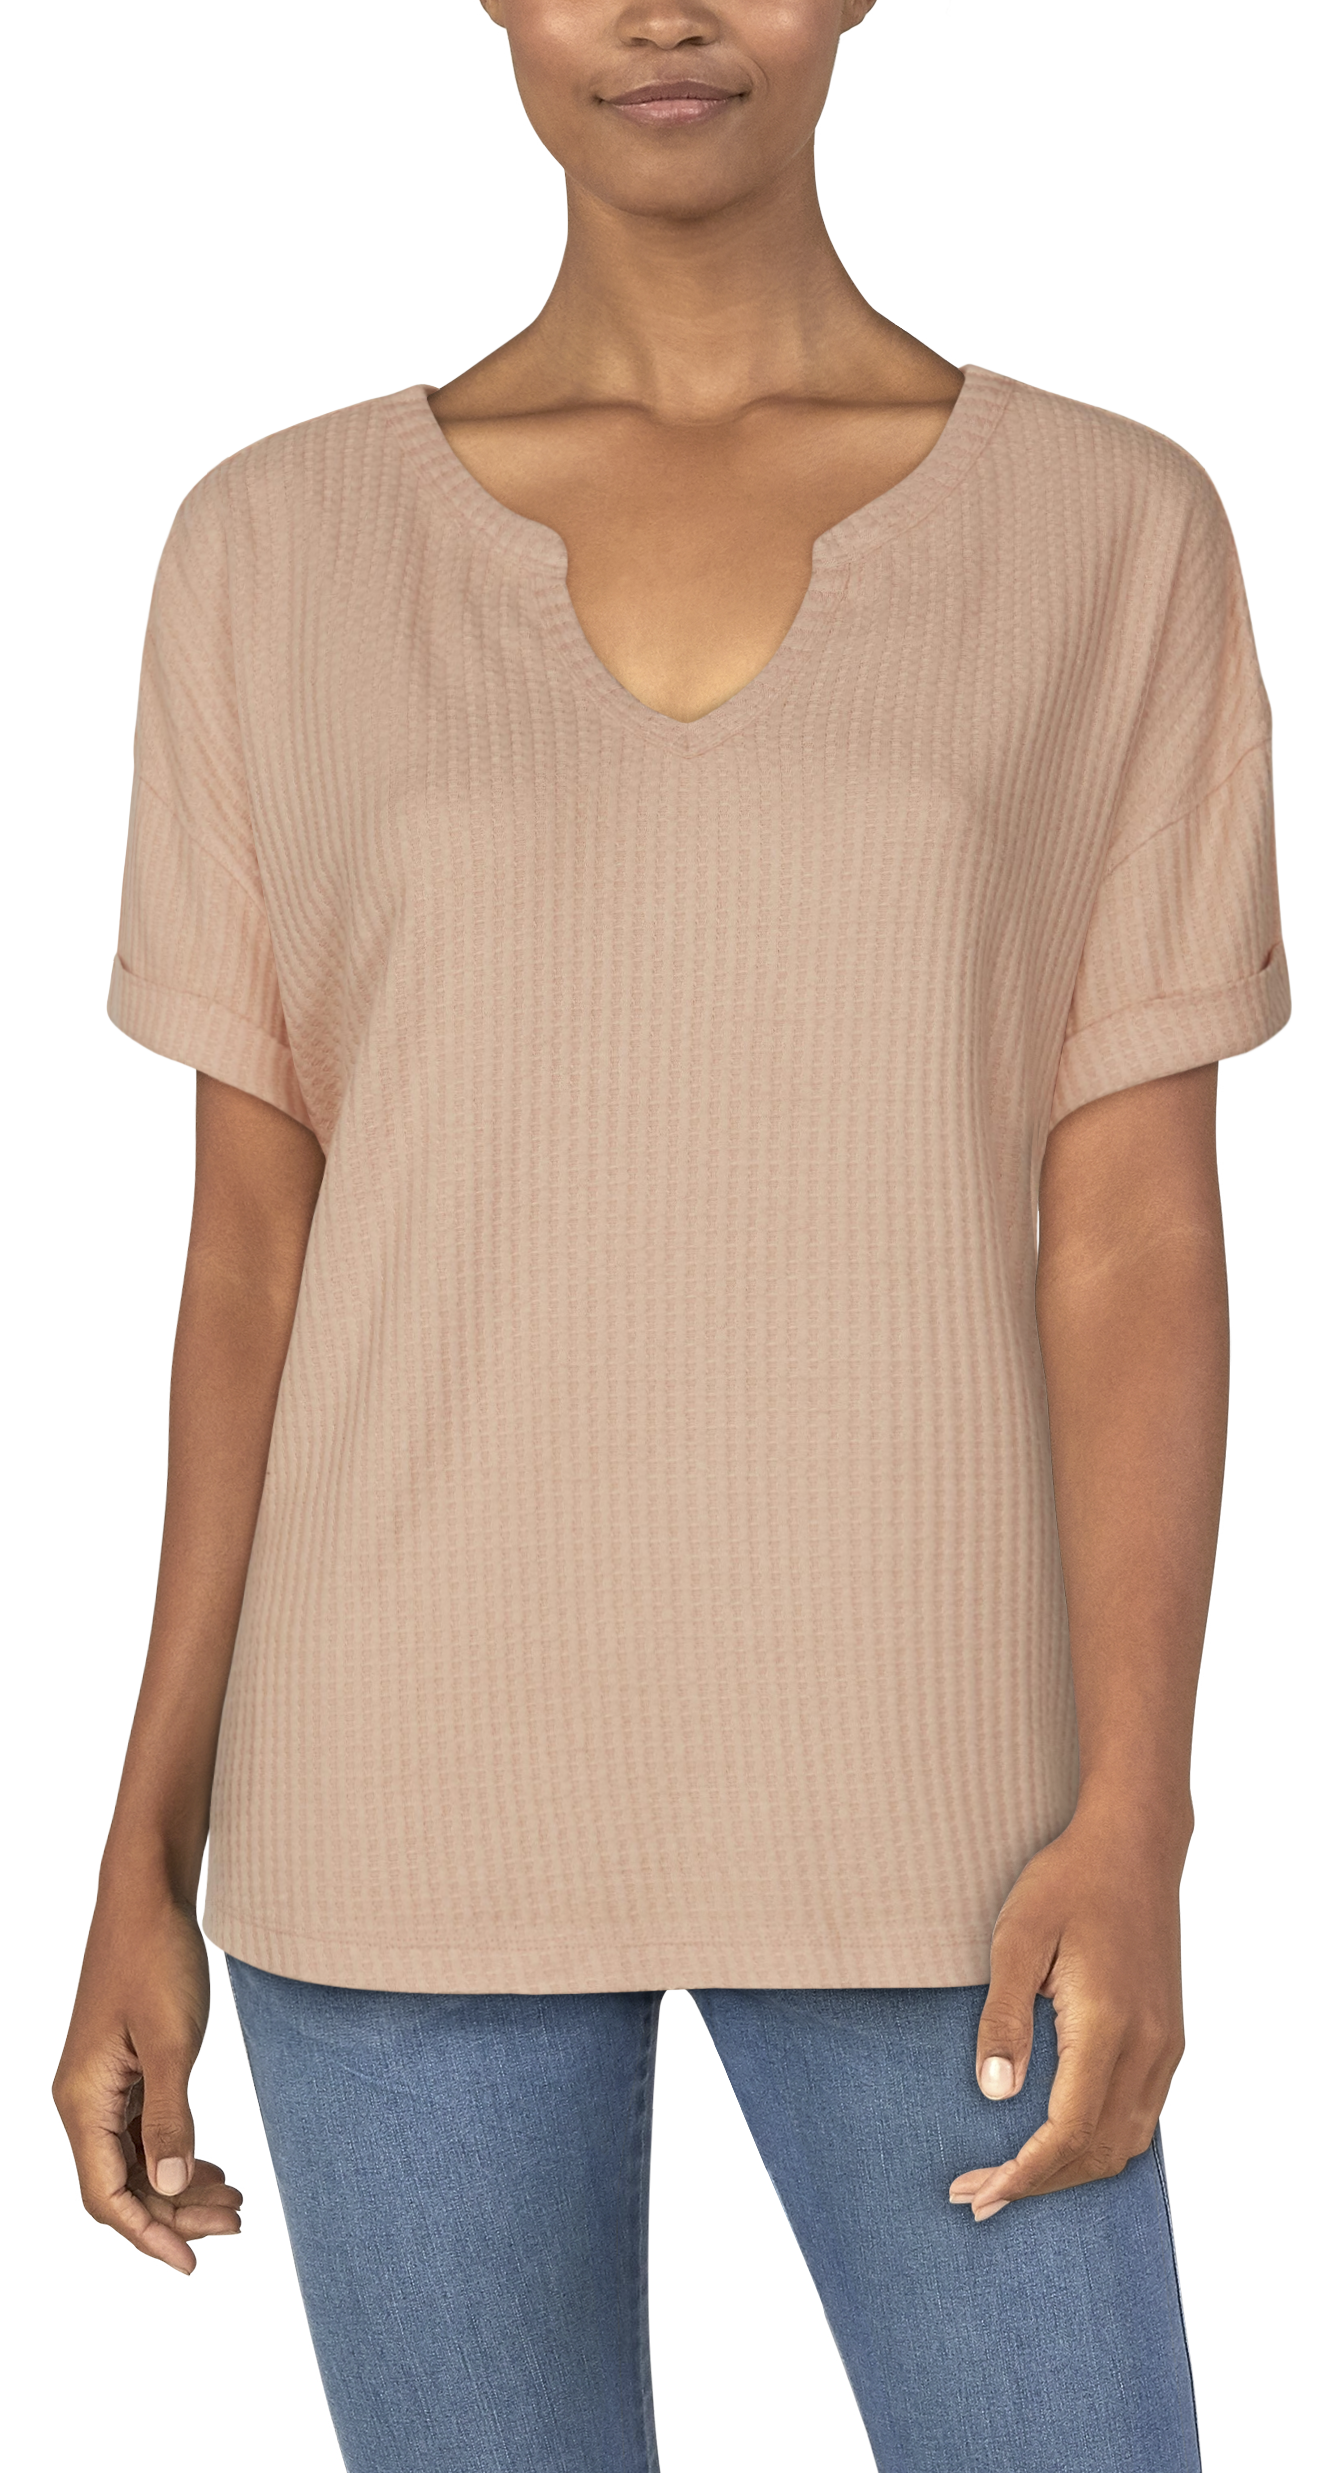 Natural Reflections Brush Creek Waffle Short-Sleeve Shirt for Ladies - Almost Apricot - L